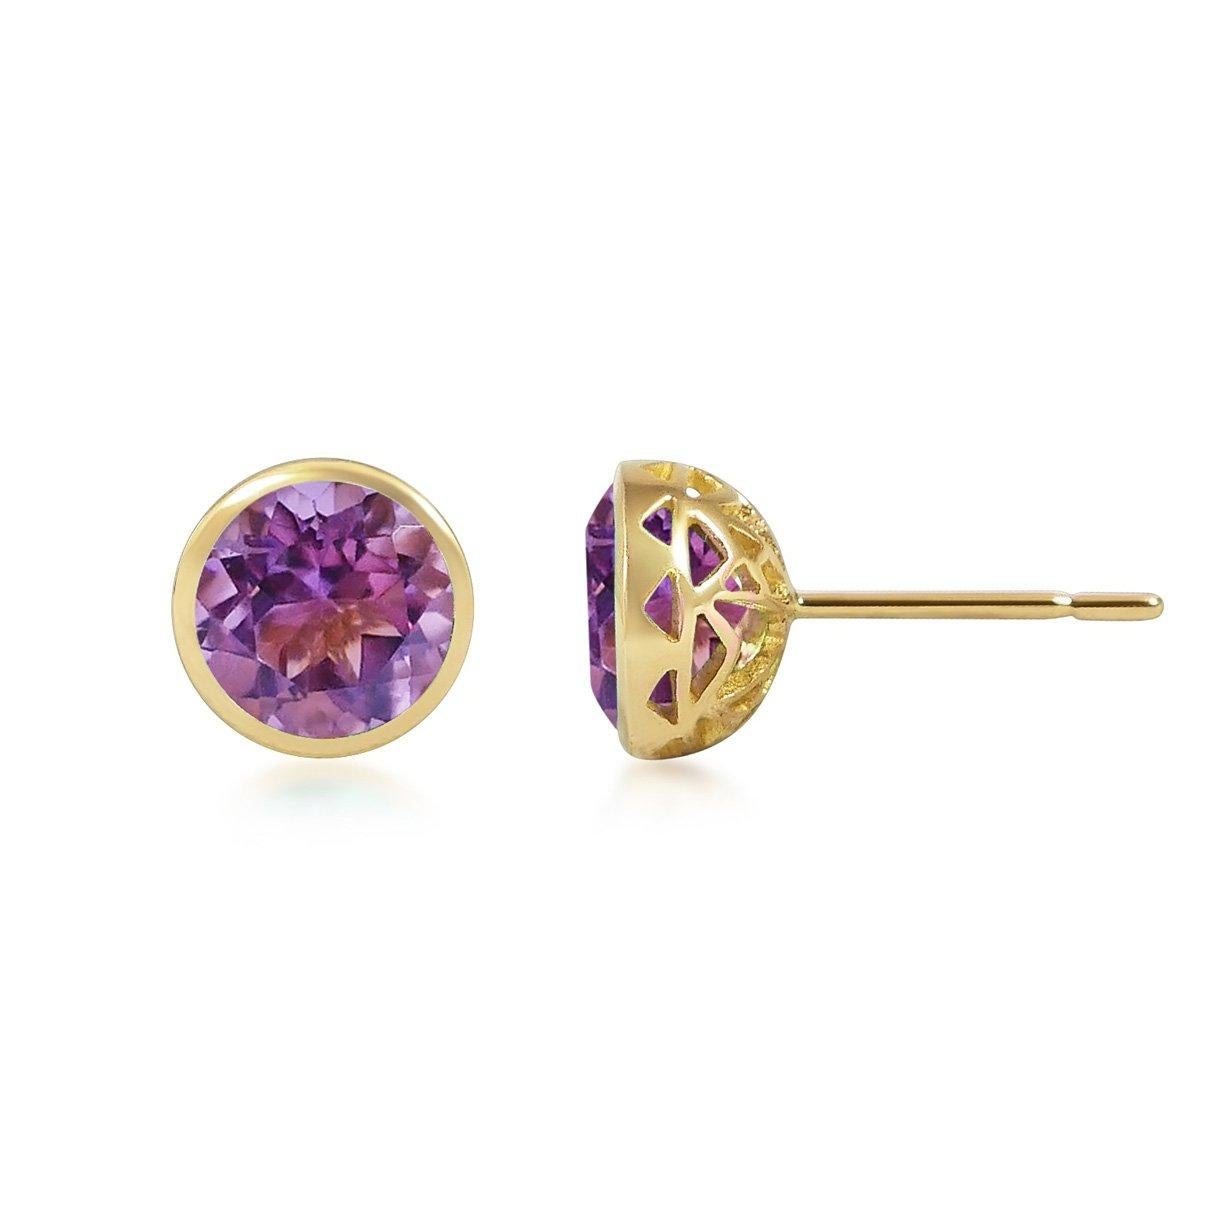 Handcrafted 2.40 Carats Amethyst 18 Karat Yellow Gold Stud Earrings. The 8mm natural stones are set in our iconic hand pierced gold lace to let the light through our precious and fine stones our earrings are the perfect everyday wear.

Once